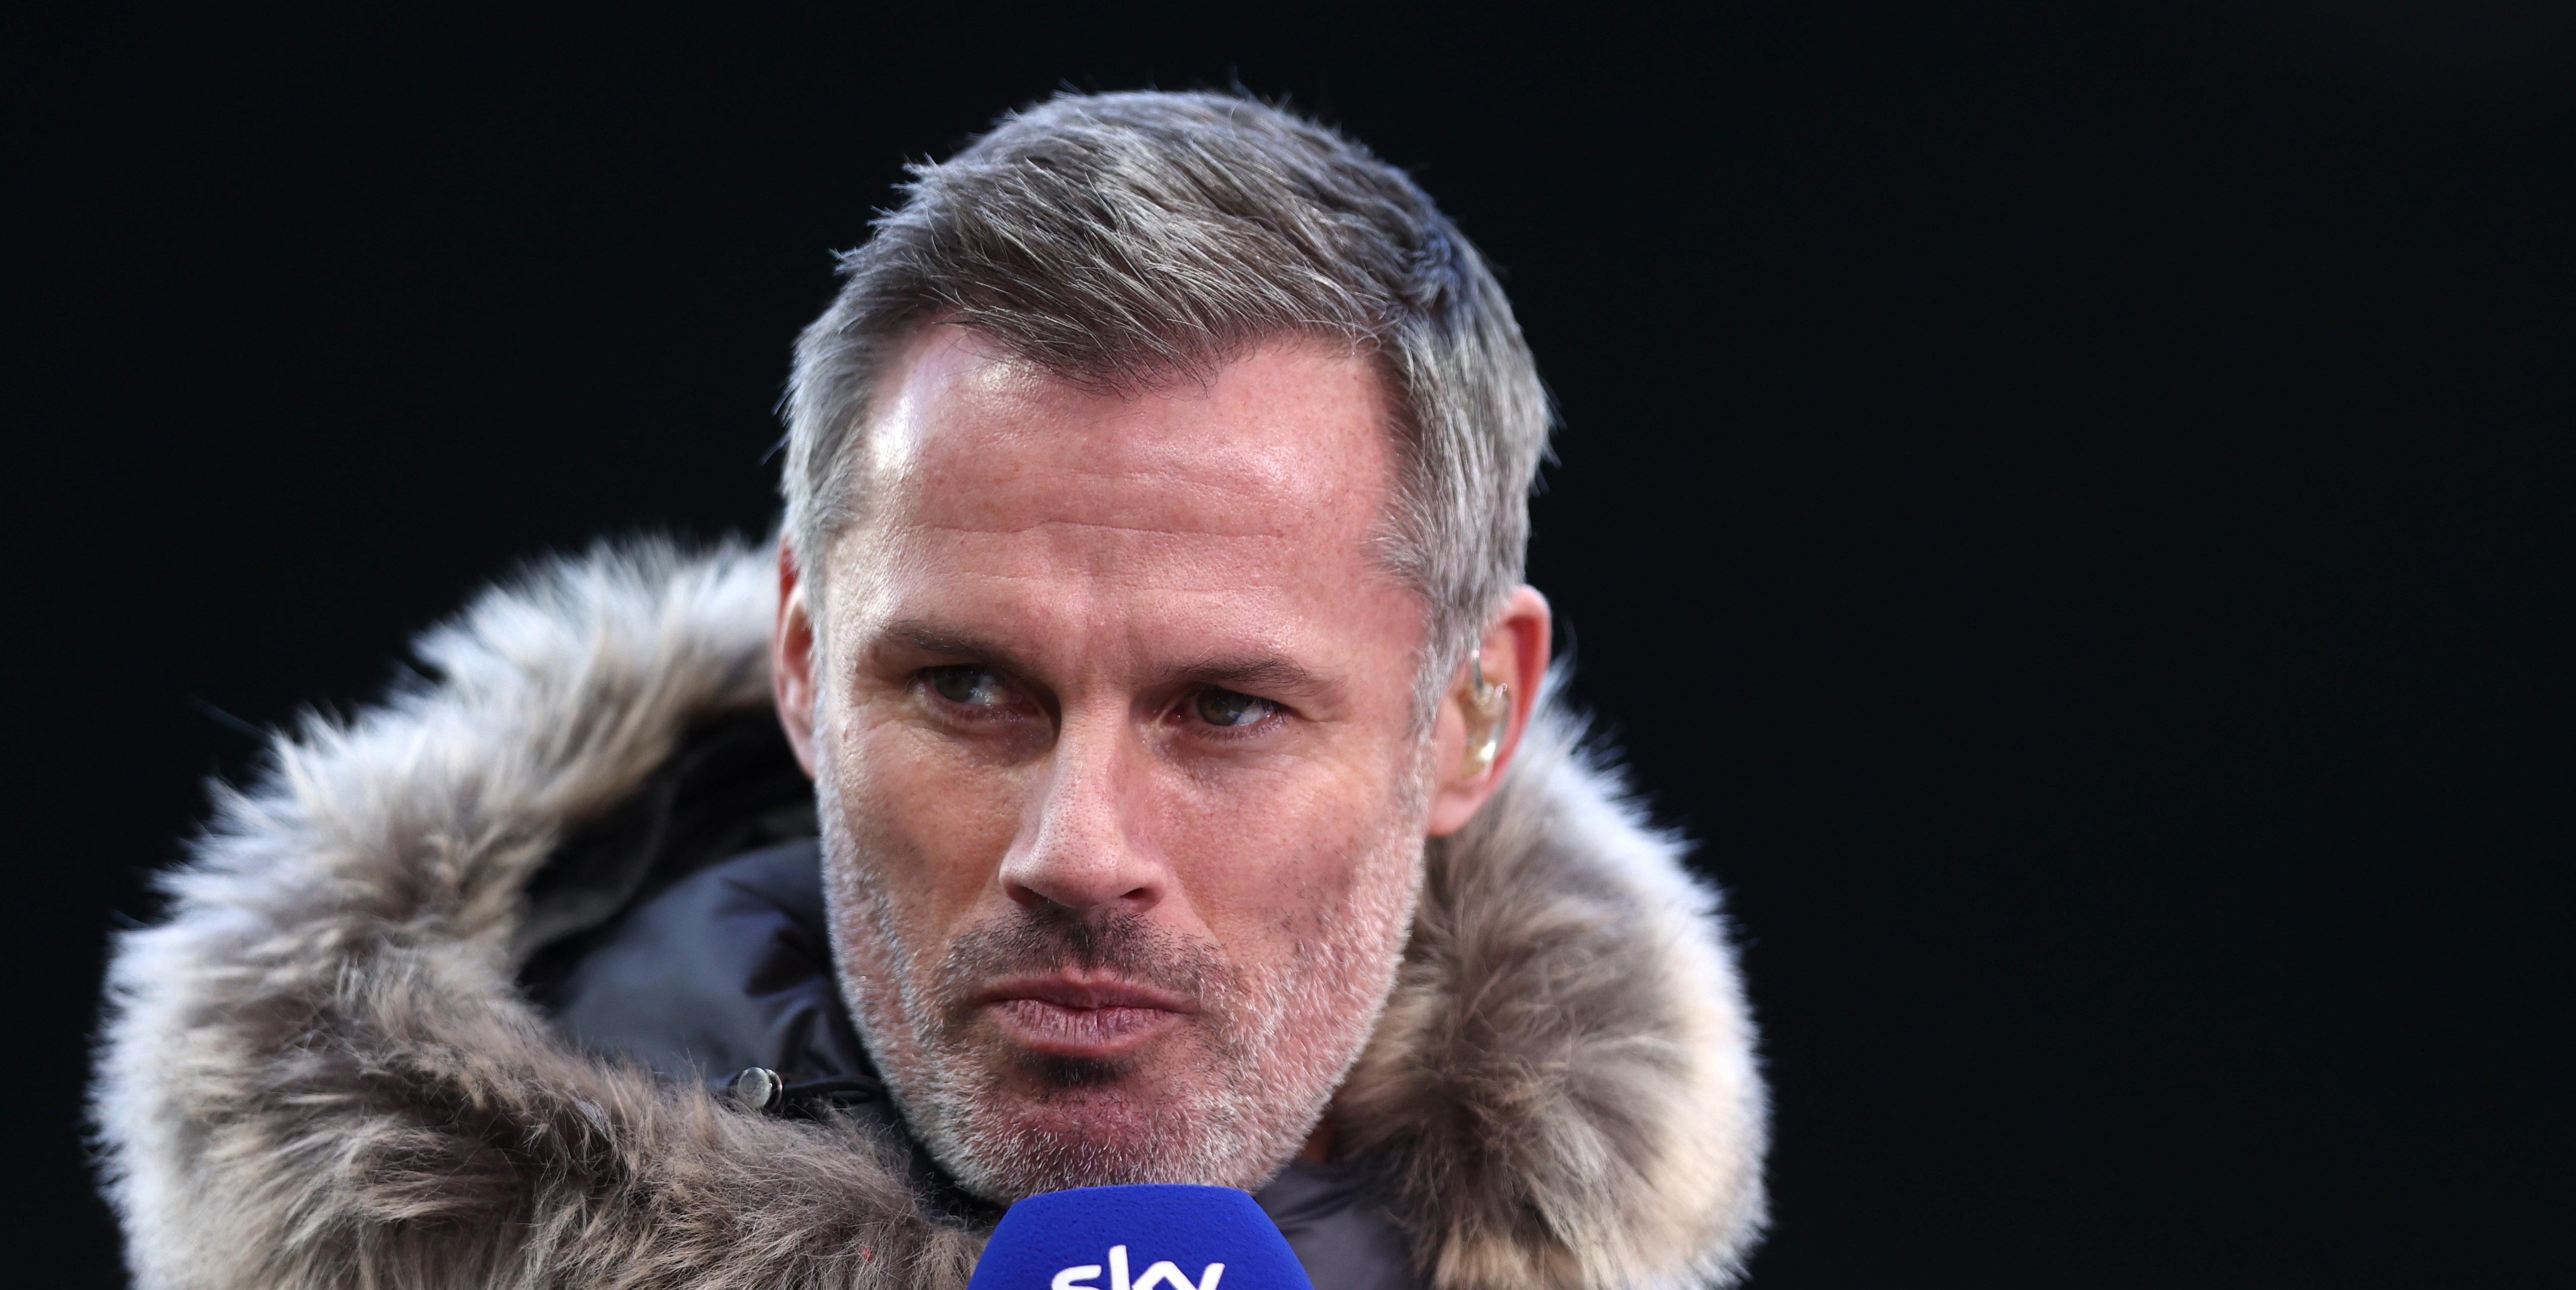 Jamie Carragher labels Manchester City ‘paranoid’ and slams them for their Jurgen Klopp ‘xenophobic’ accusations